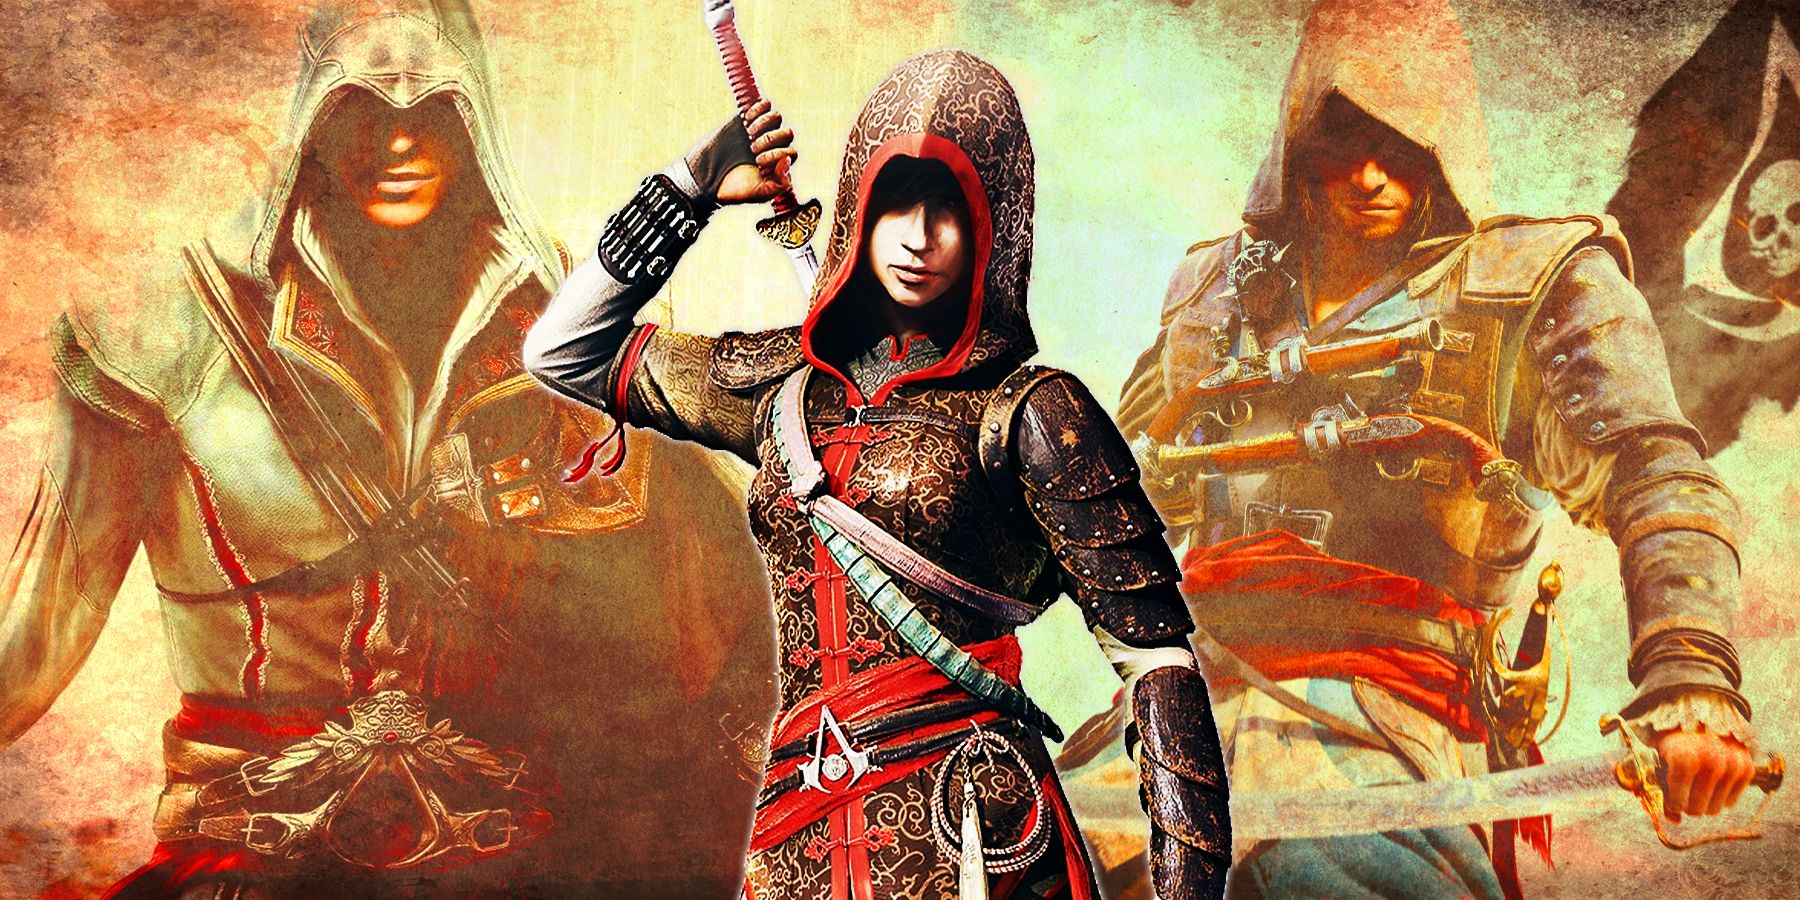 What is the best armor in Assassin's Creed Revelations? Where can